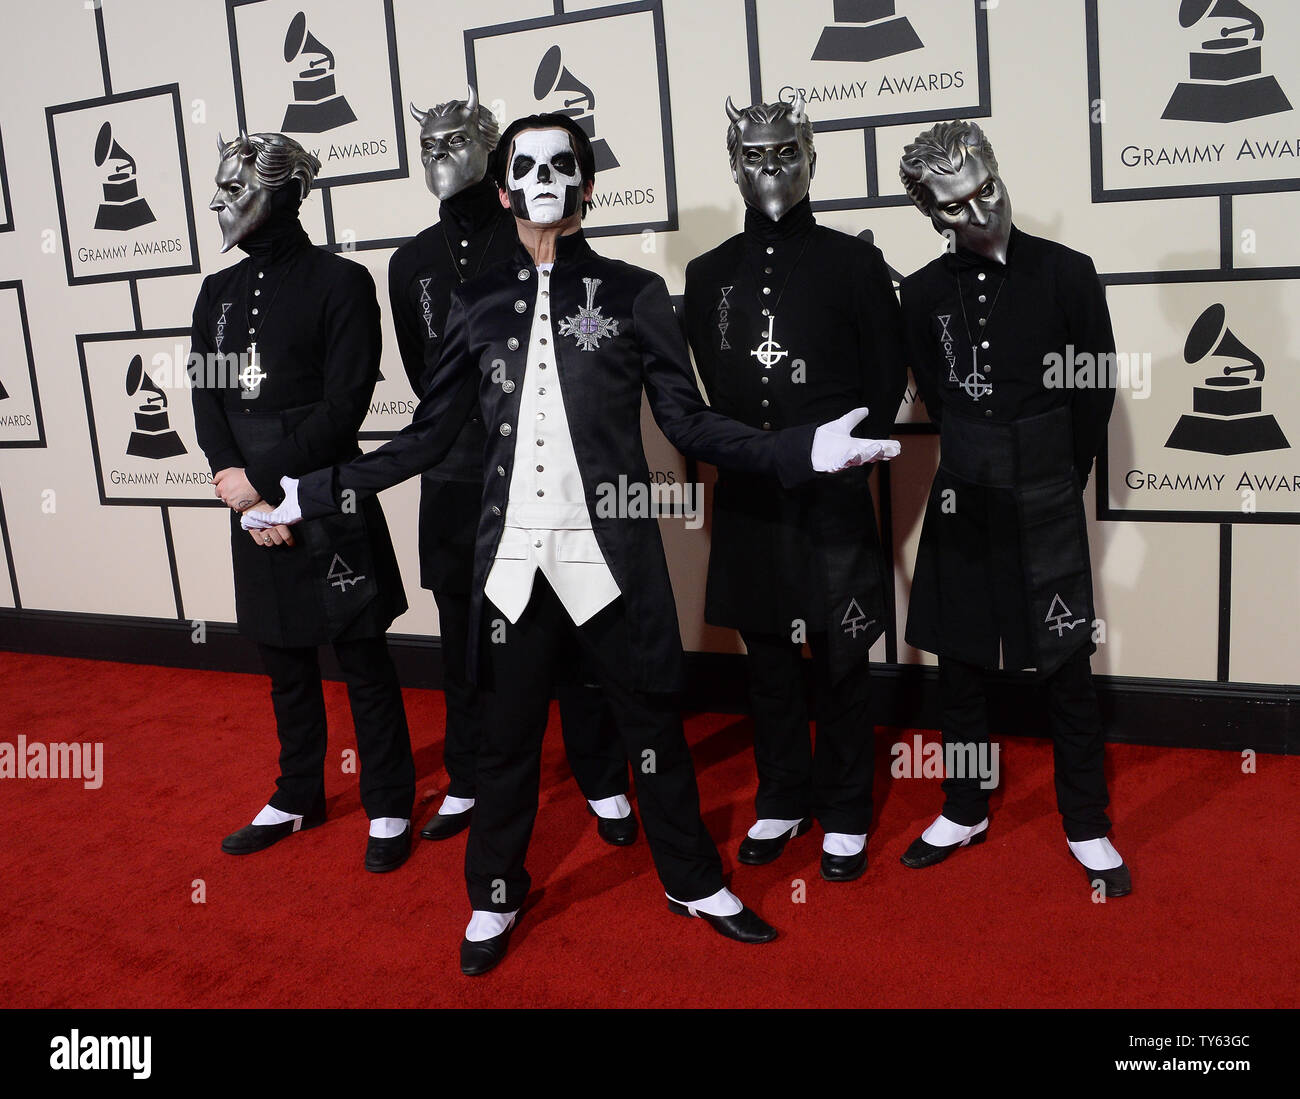 Ghost Arrives For The 58th Annual Grammy Awards Held At Staples Center In Los Angeles On